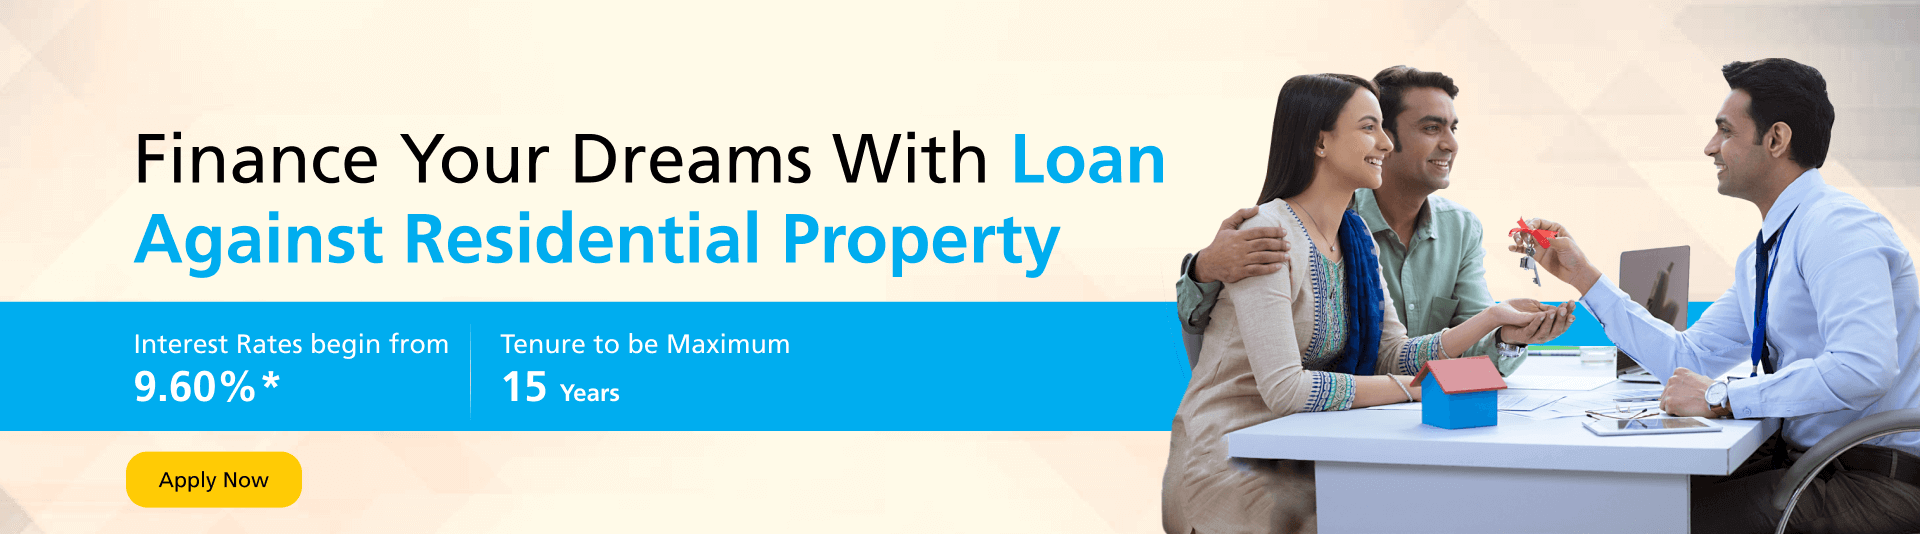 Loan Againest Property Banner